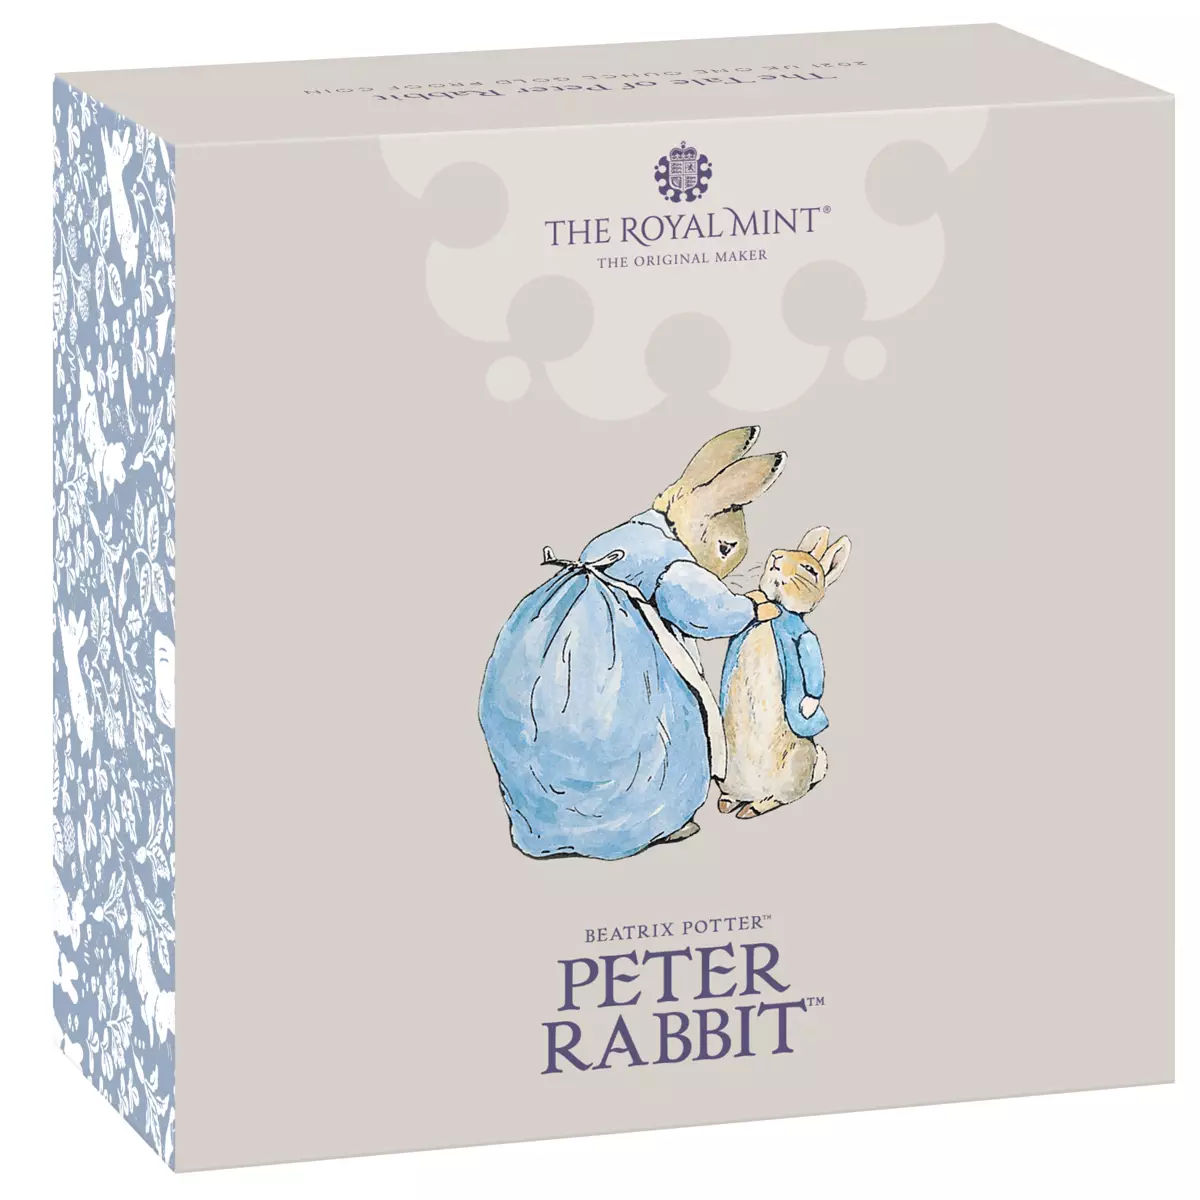 The coin features Peter Rabbit and the whole Rabbit family (